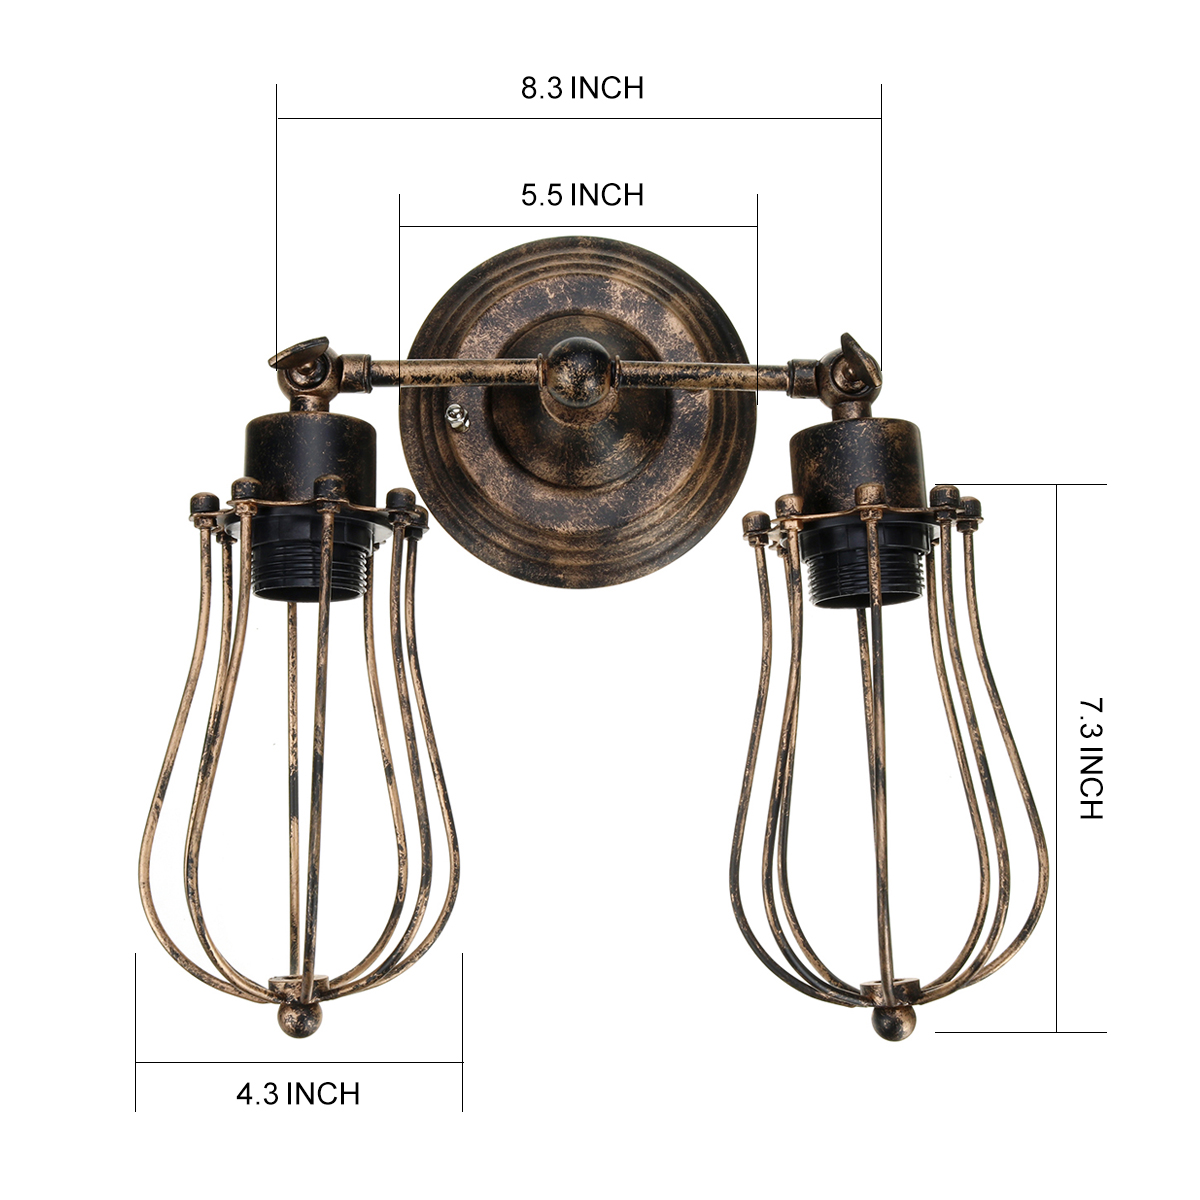 Vintage-Industrial-Wall-mounted-Metal-Cage-Wall-Sconce-Lampshade-Light-Shade-Without-Bulb-1721820-5